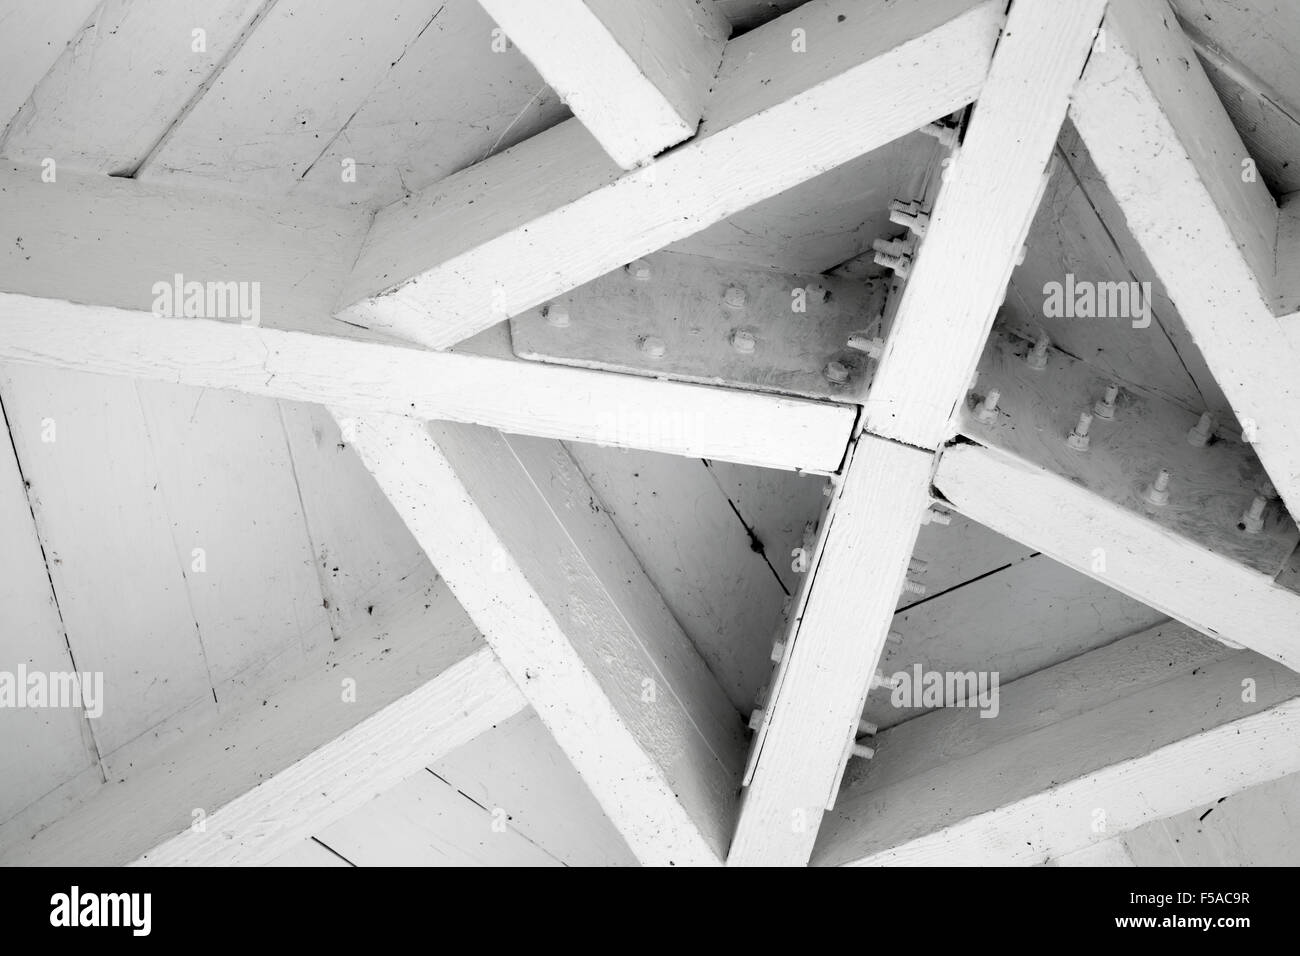 Abstract wooden architecture fragment, roof beams connection Stock Photo